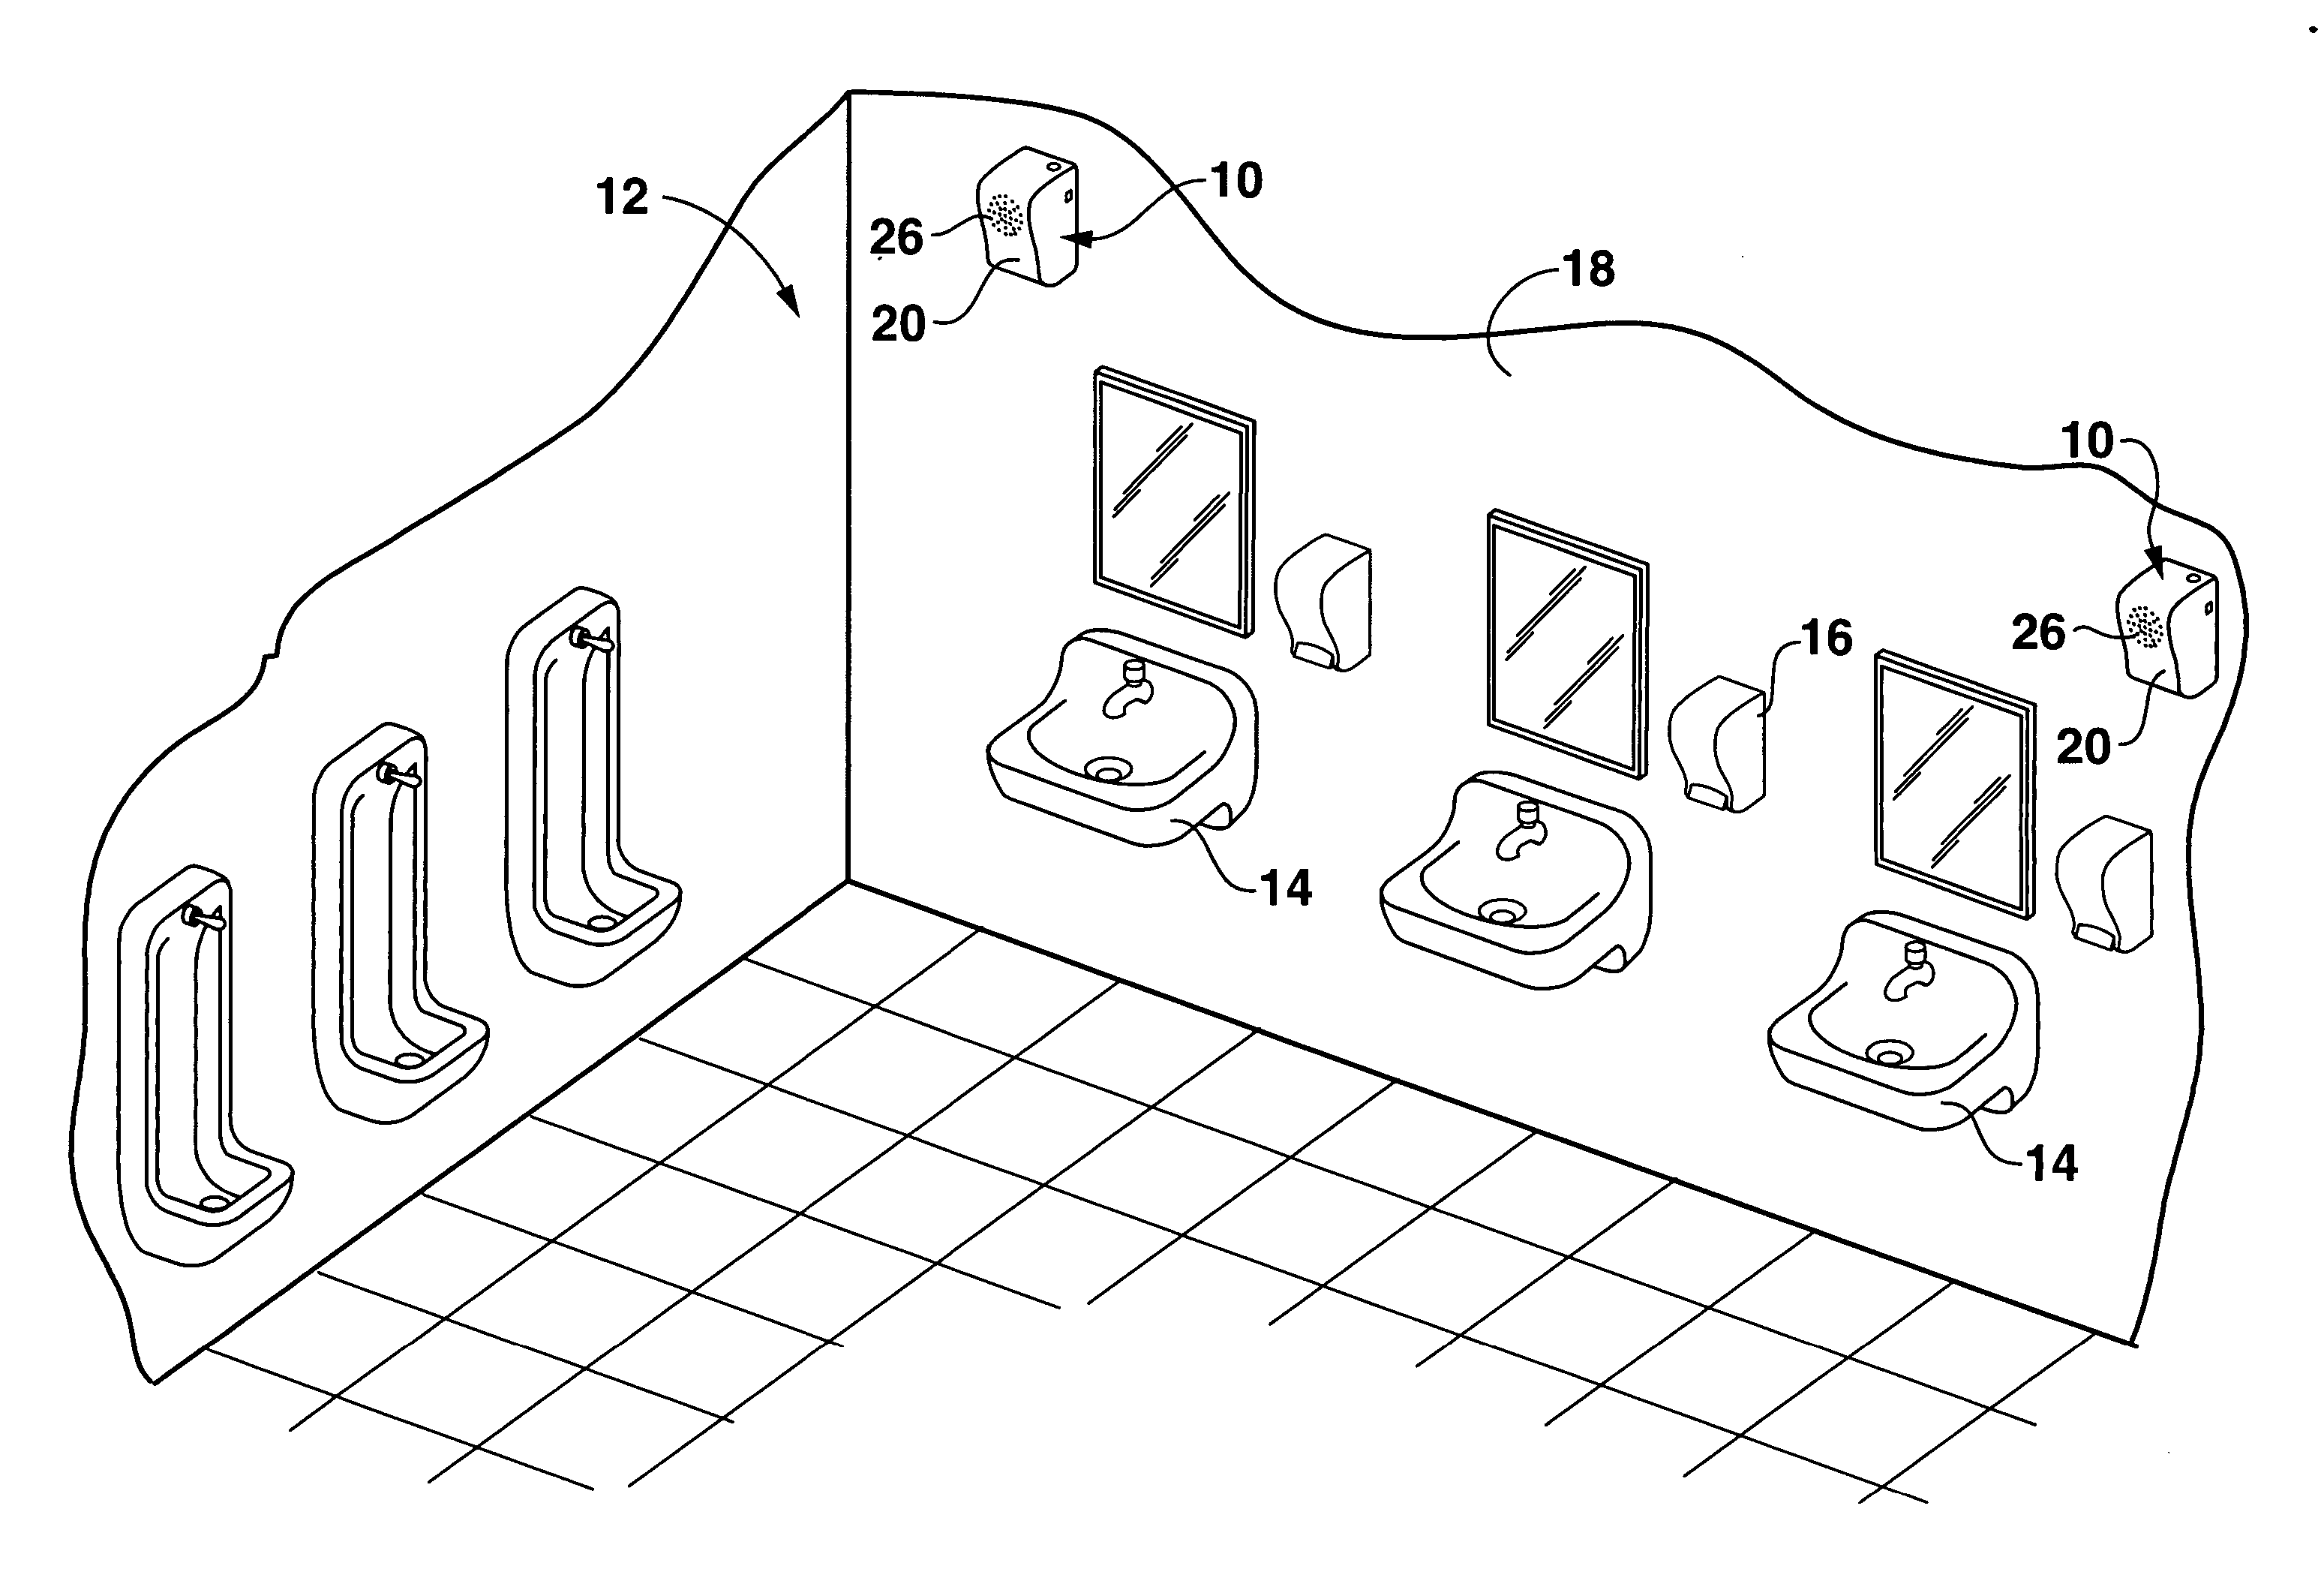 Device for encouraging hand wash compliance